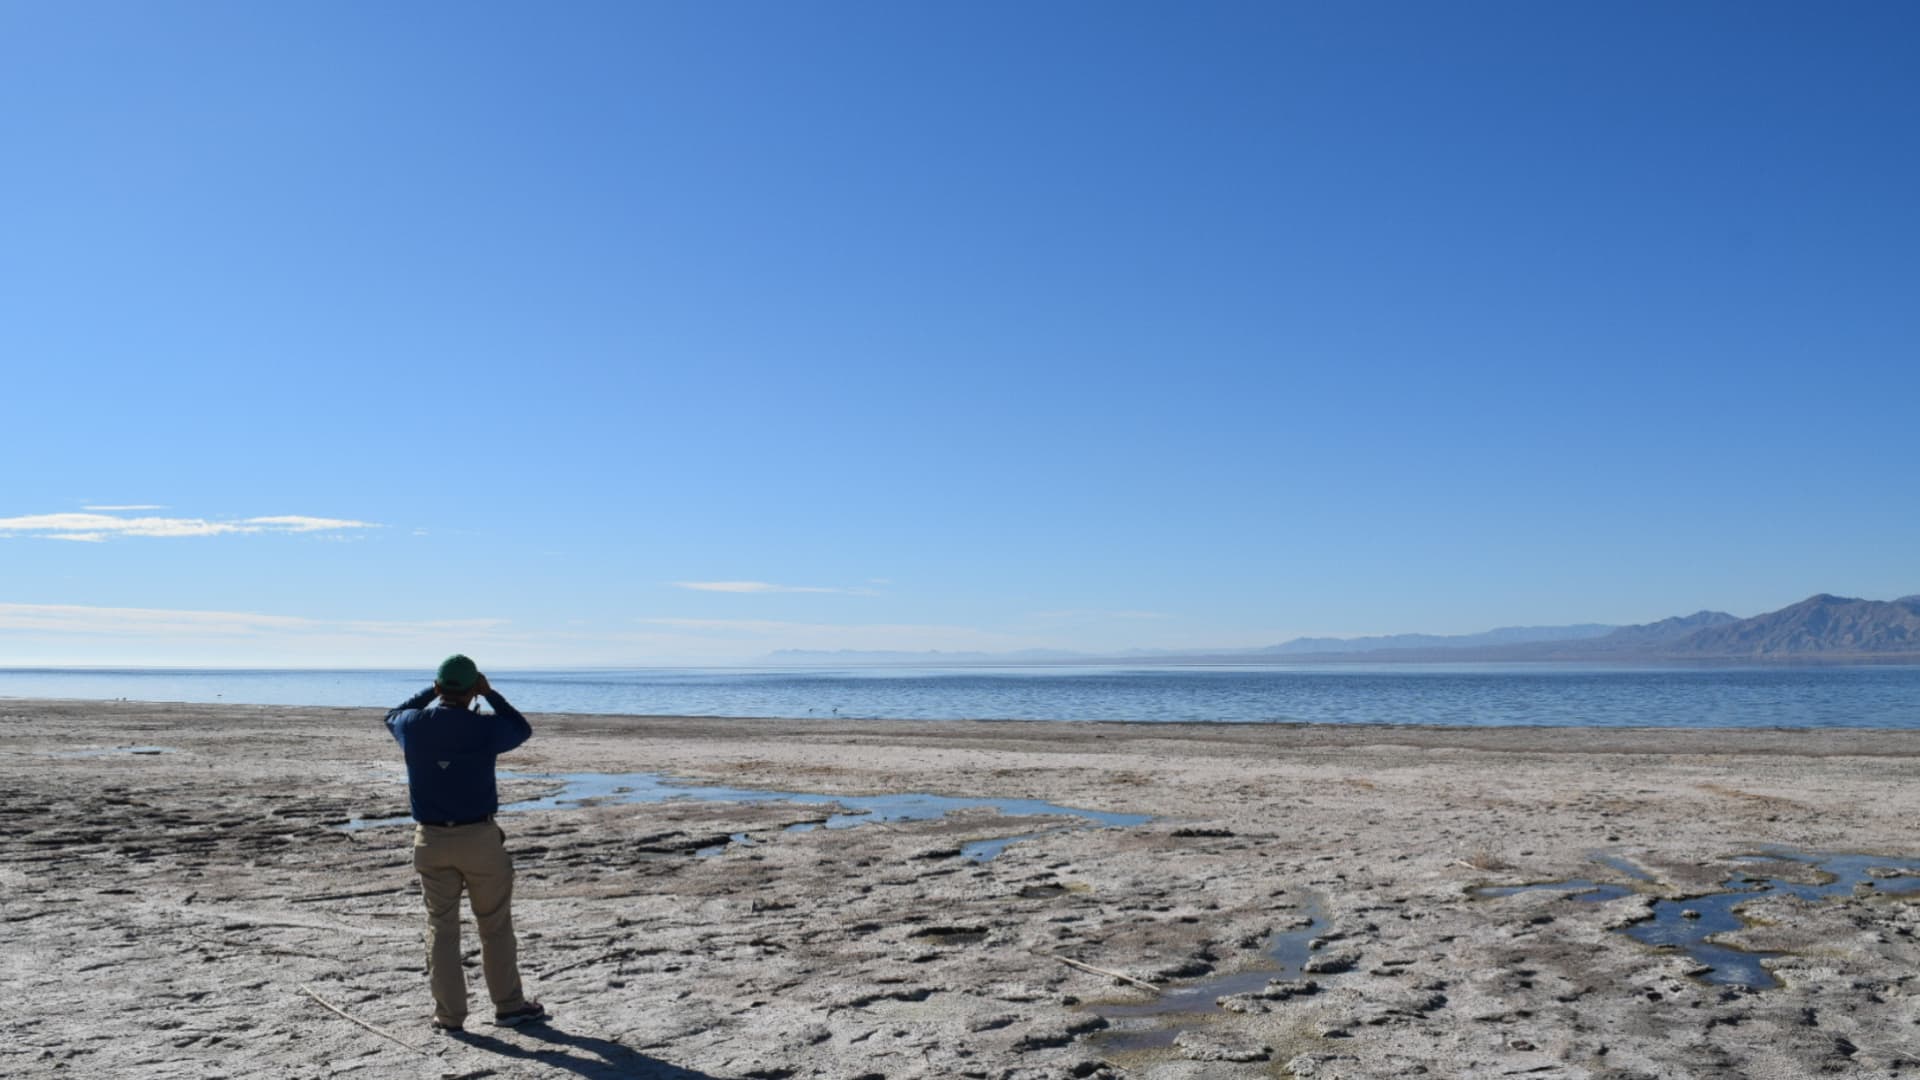 California's Salton Sea spewing toxic fumes, creating ghost towns 